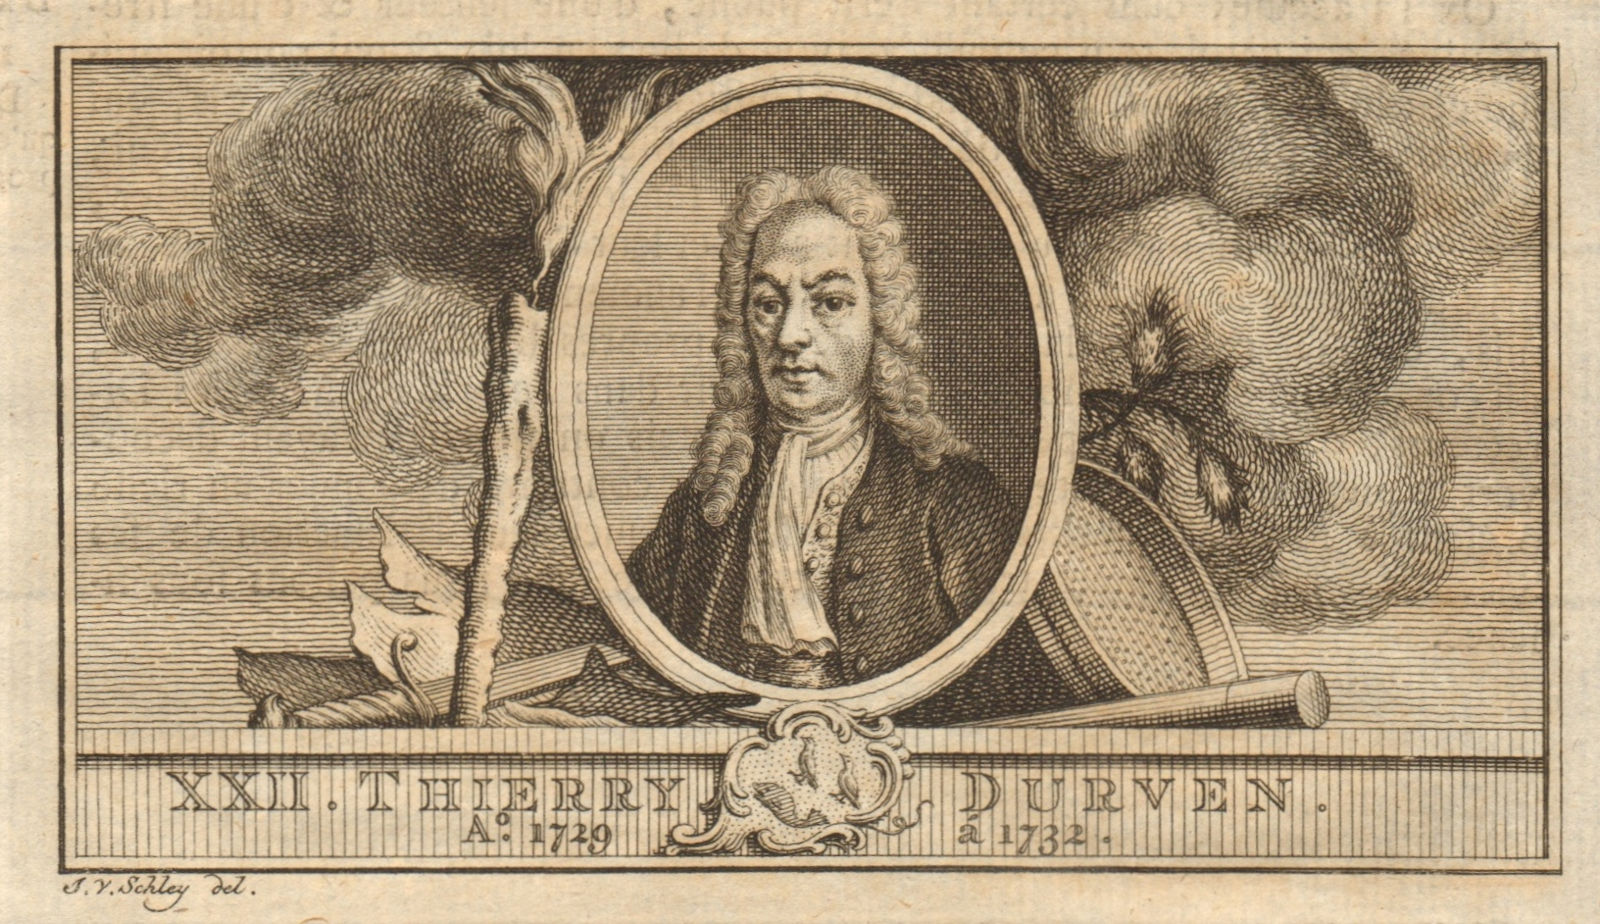 Associate Product Diederik Durven, Governor-General of the Dutch East Indies 1729-1732 1763